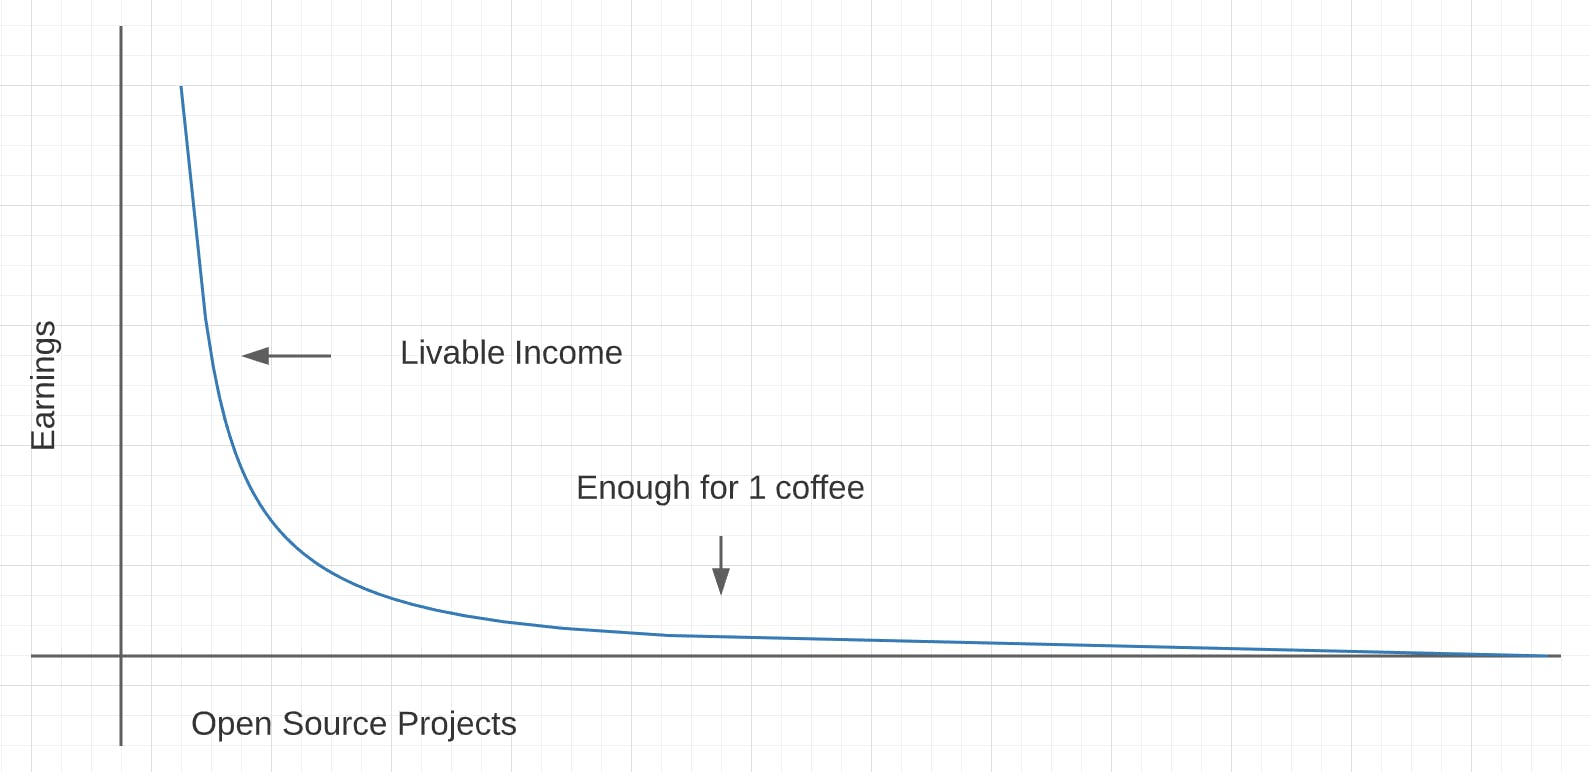 Graph showing exponential decline from a "Livable Wage" quickly down past the price of a Coffee approaching zero as the number of open source projects increase